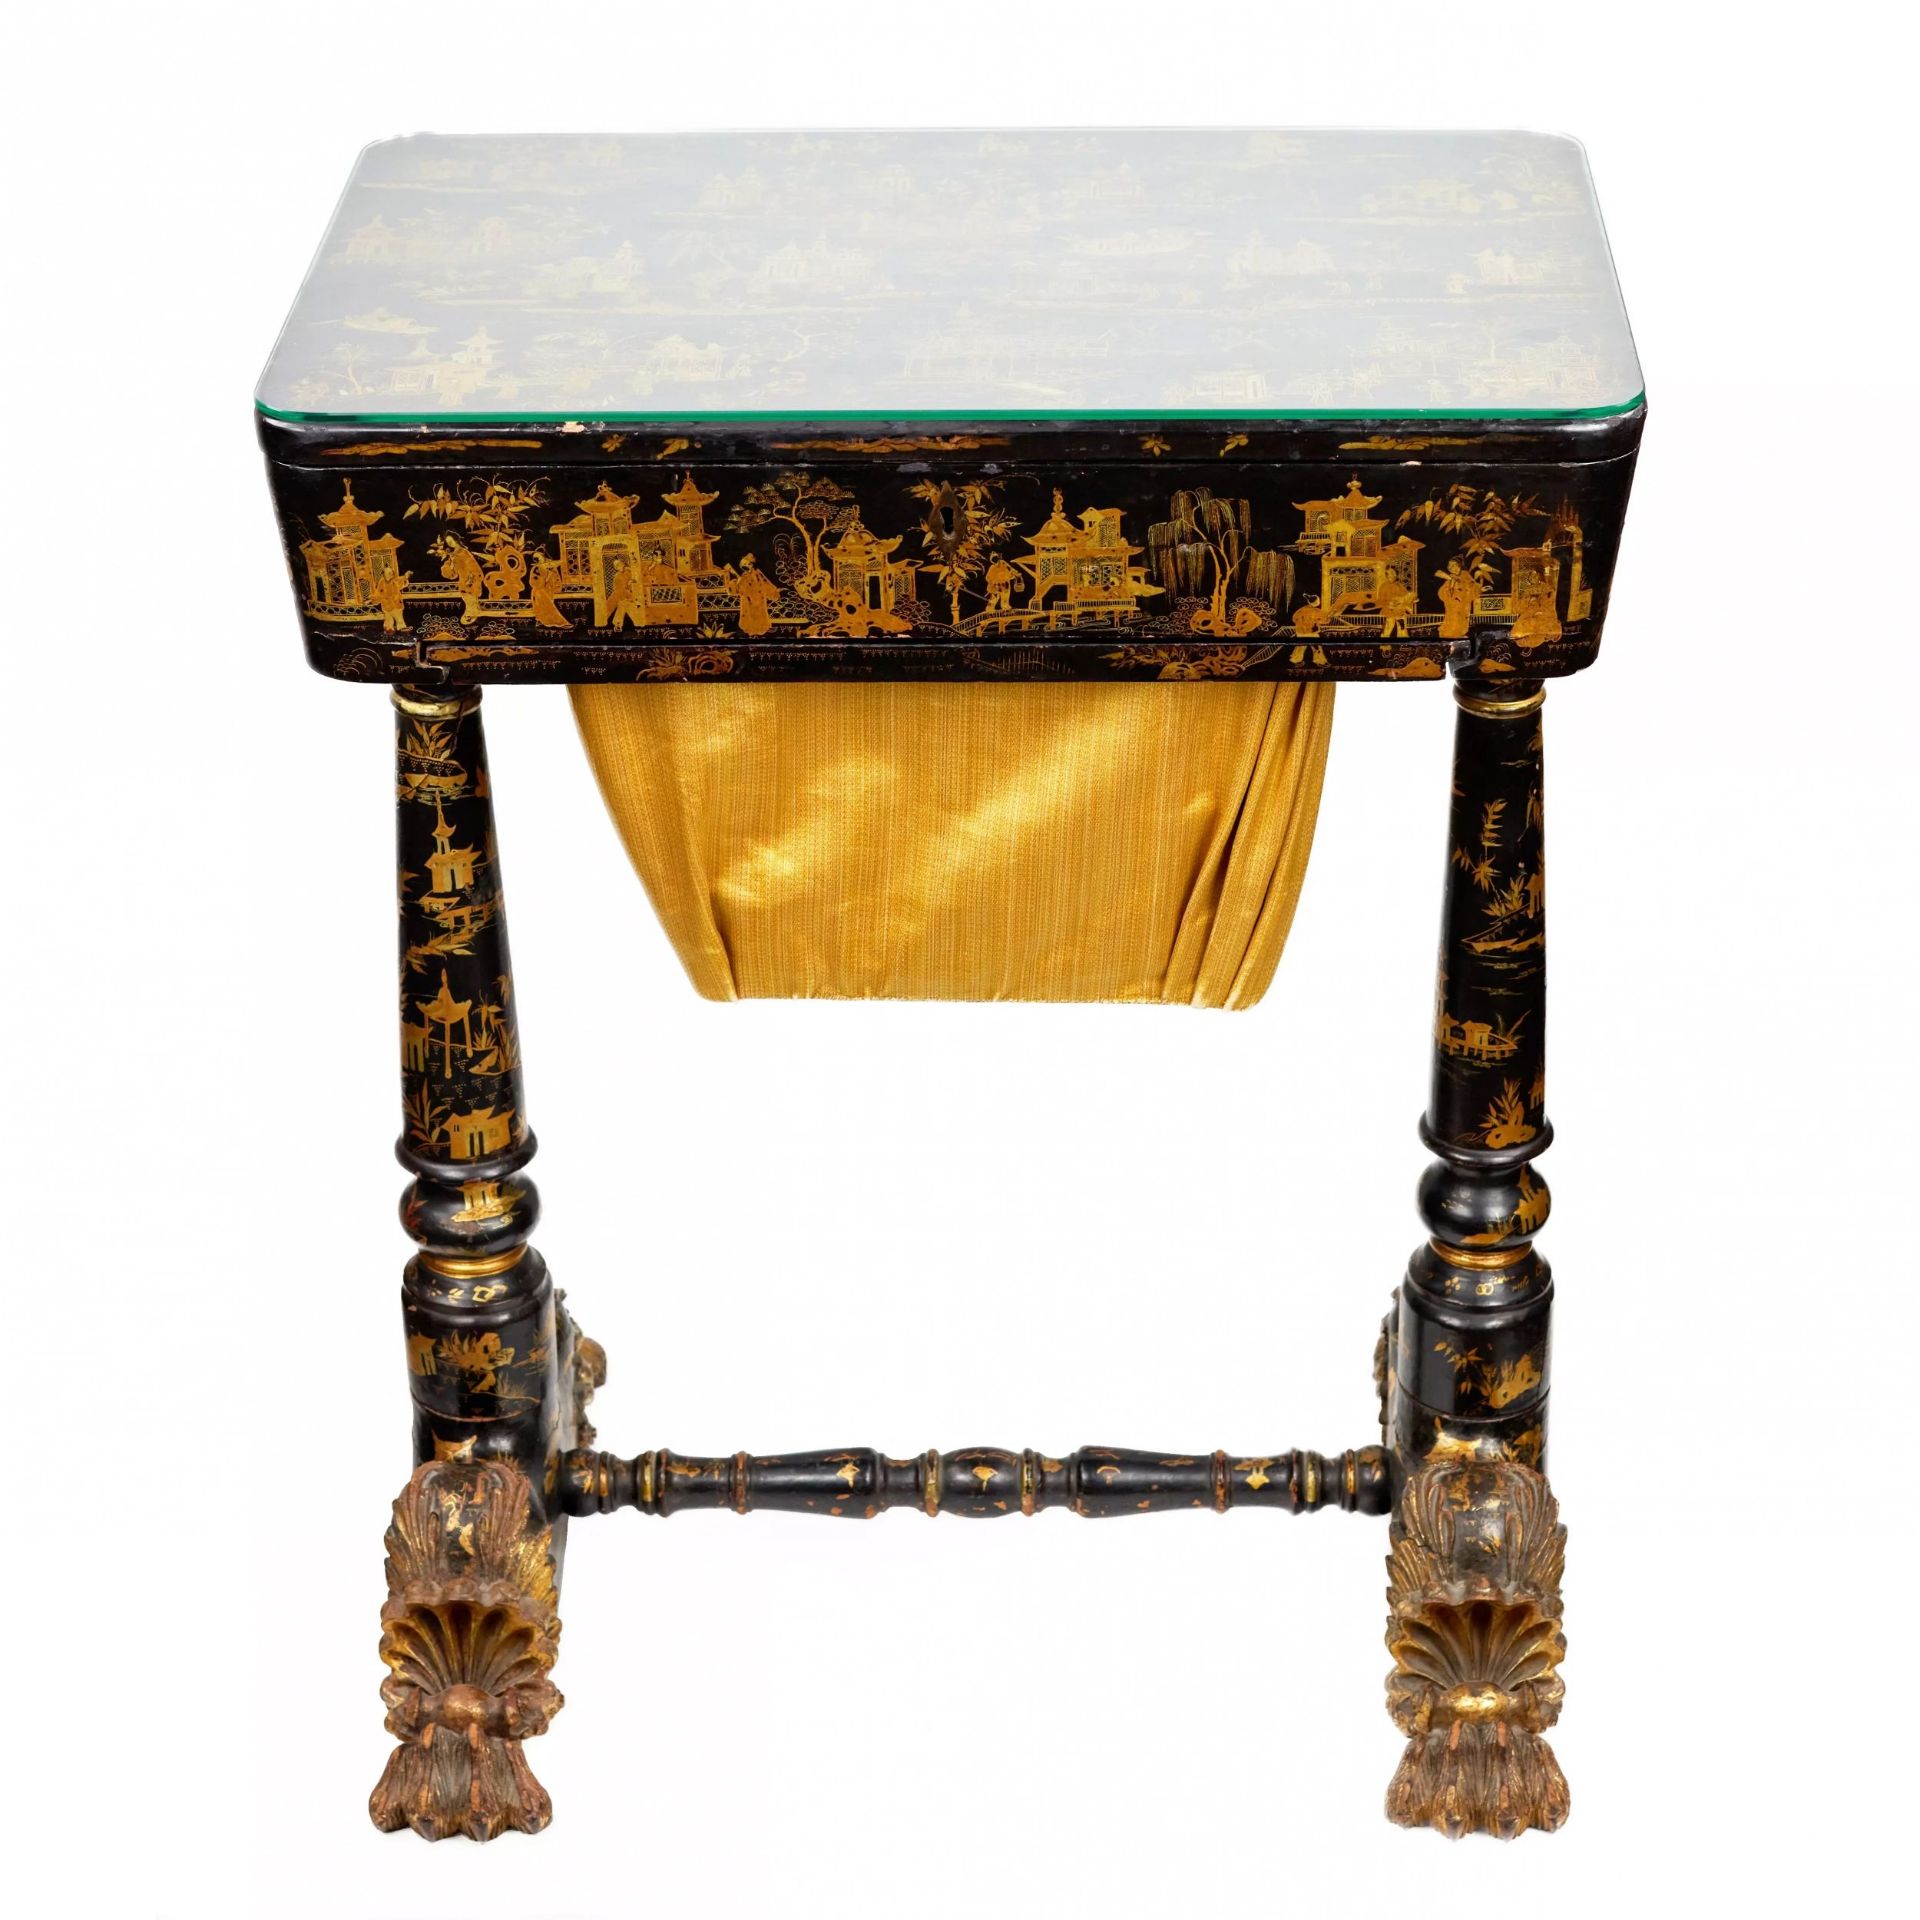 Needlework table made of black and gold Beijing lacquer. 19th century. - Image 6 of 11